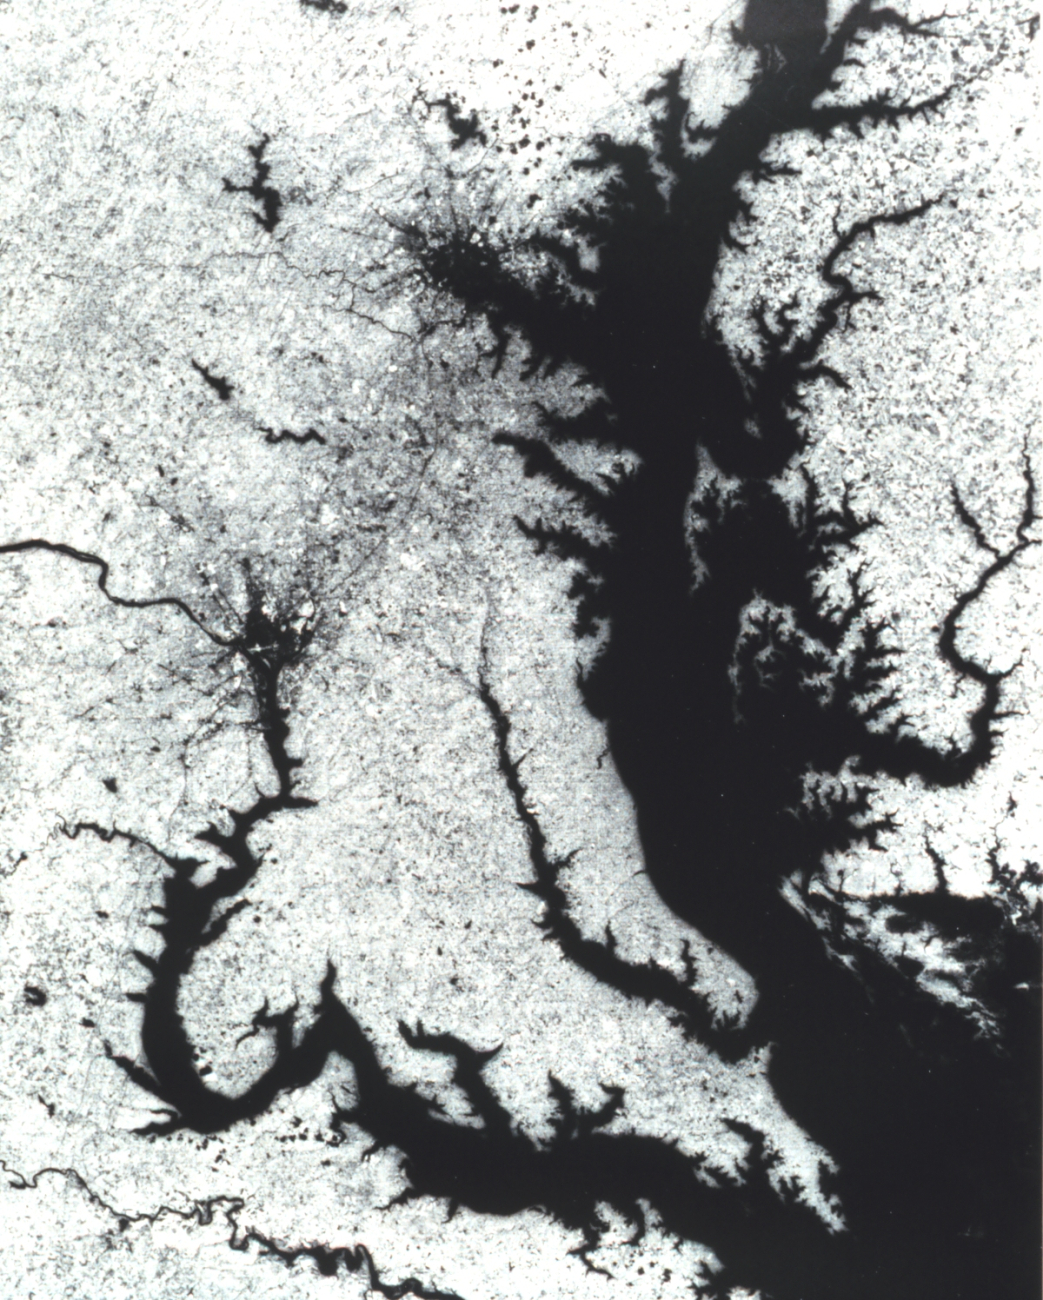 Infrared imagery as obtained by the Landsat satellite of upper Chesapeake Bay